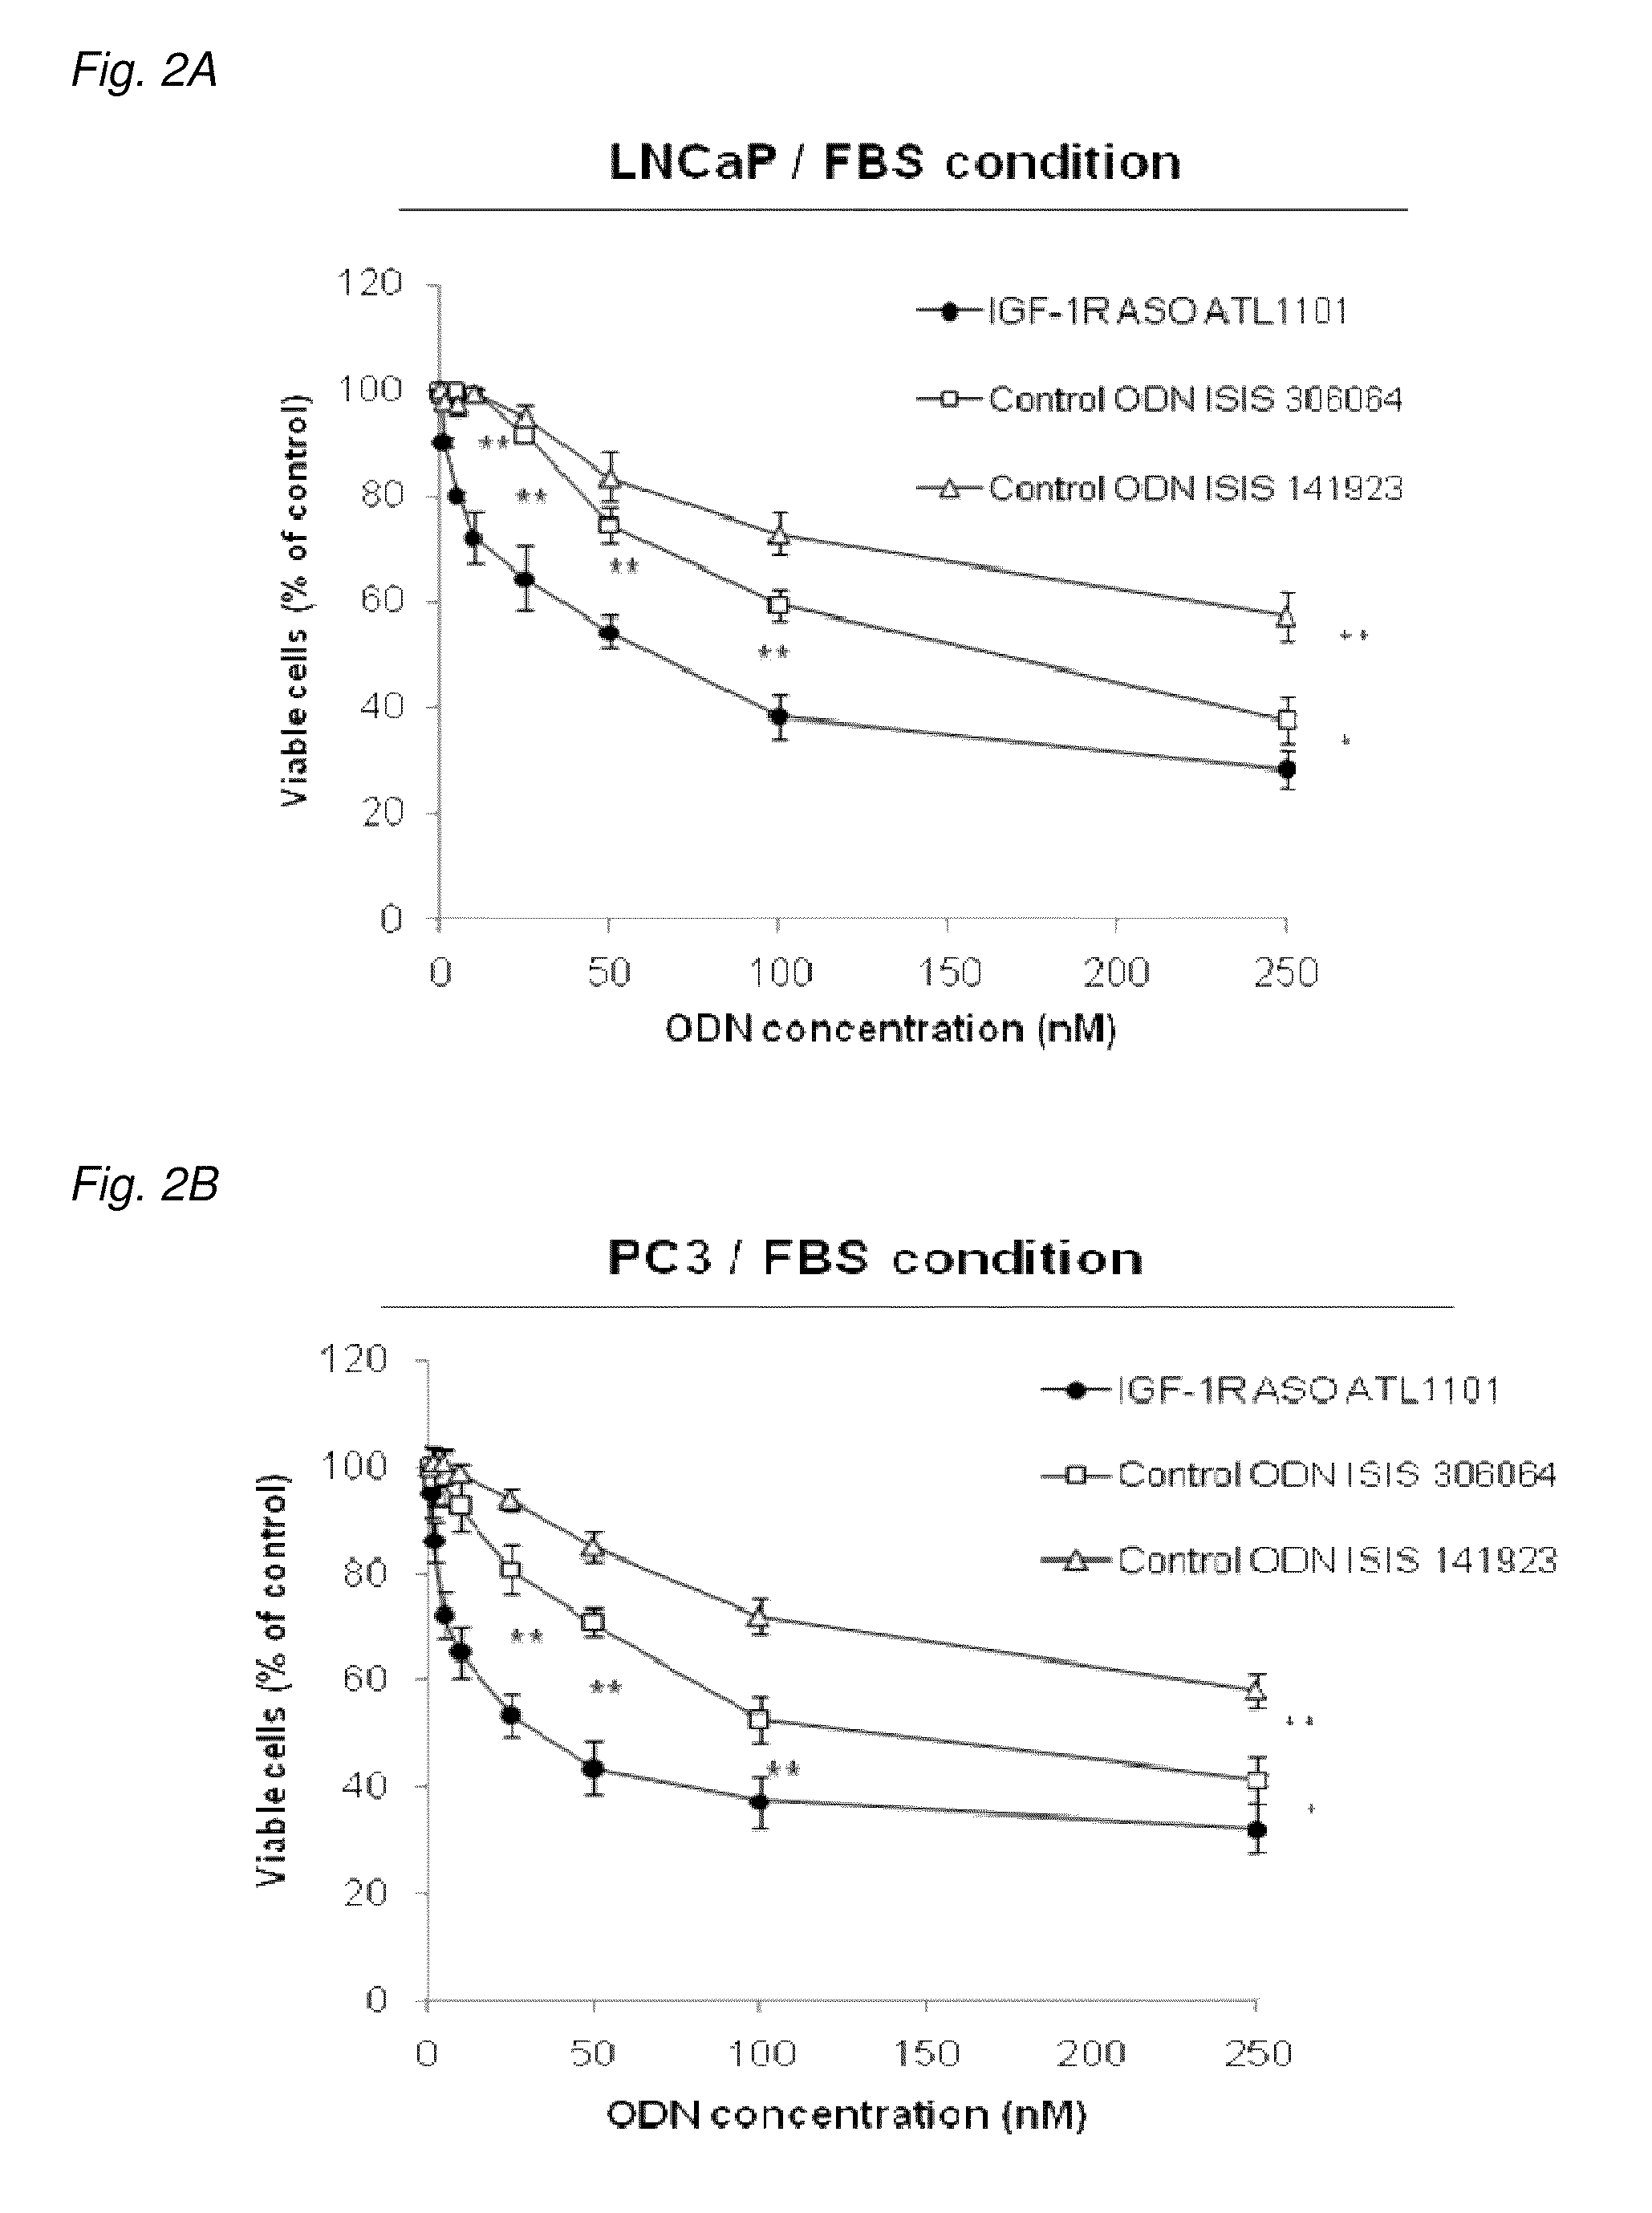 Modulation of insulin like growth factor i receptor expression in cancer